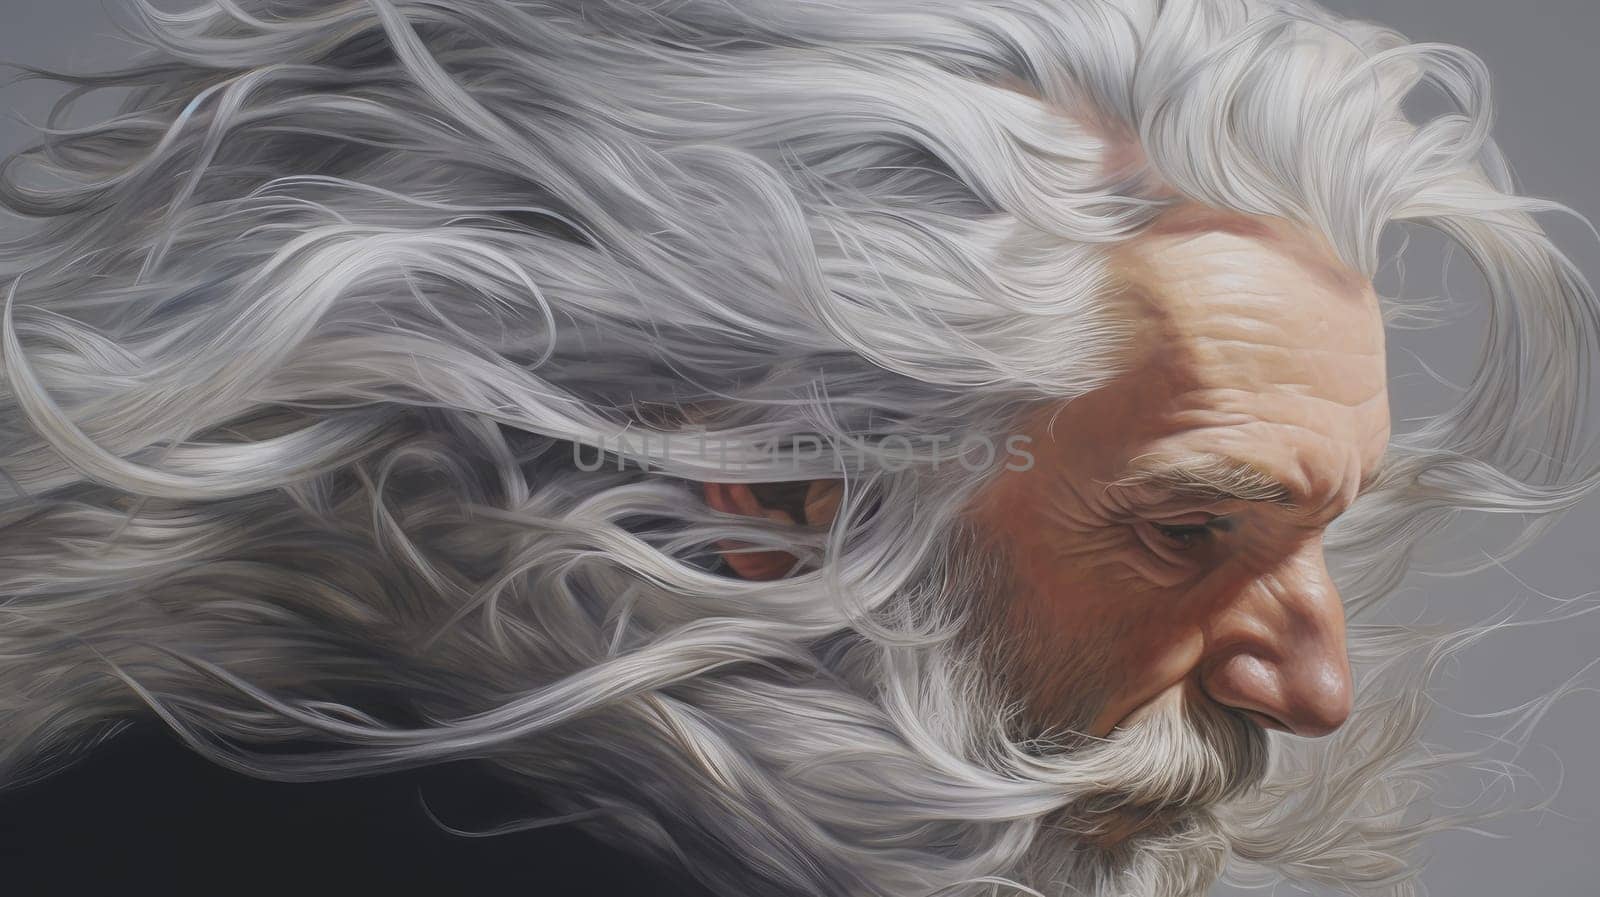 Portrait of a man with gray hair, old age concept by Kadula